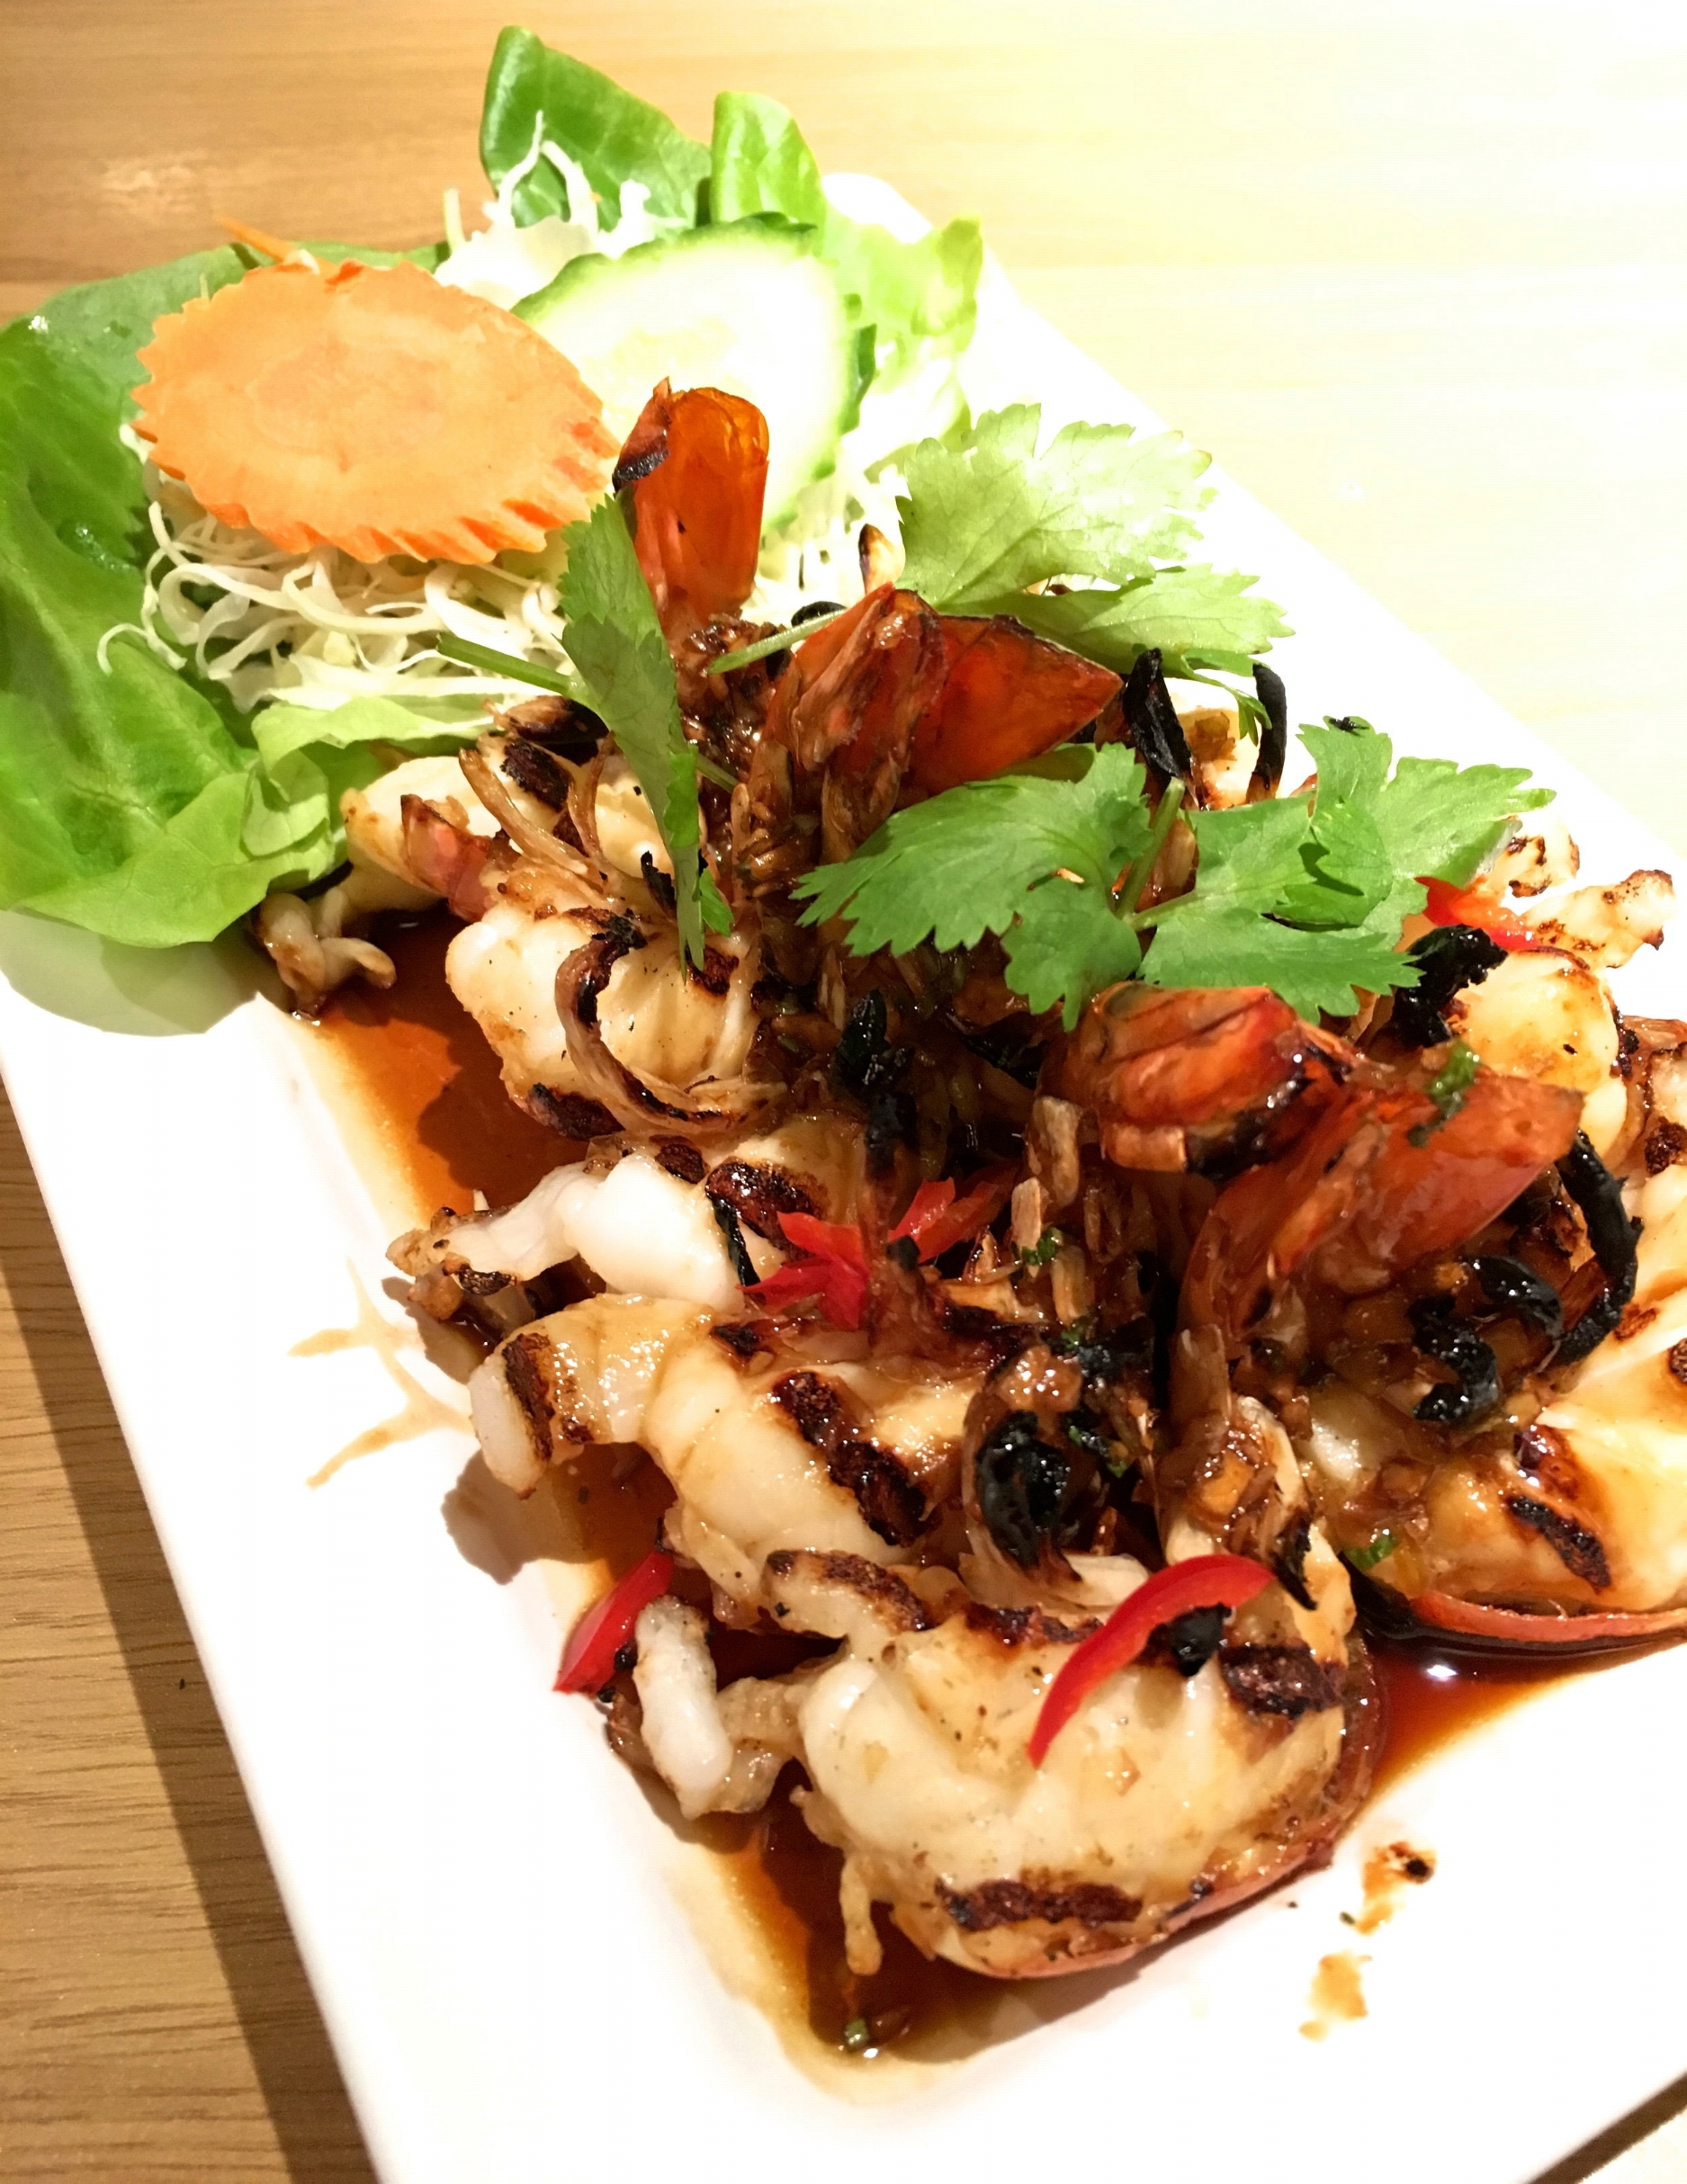 Grilled prawns with Addie's special sauce